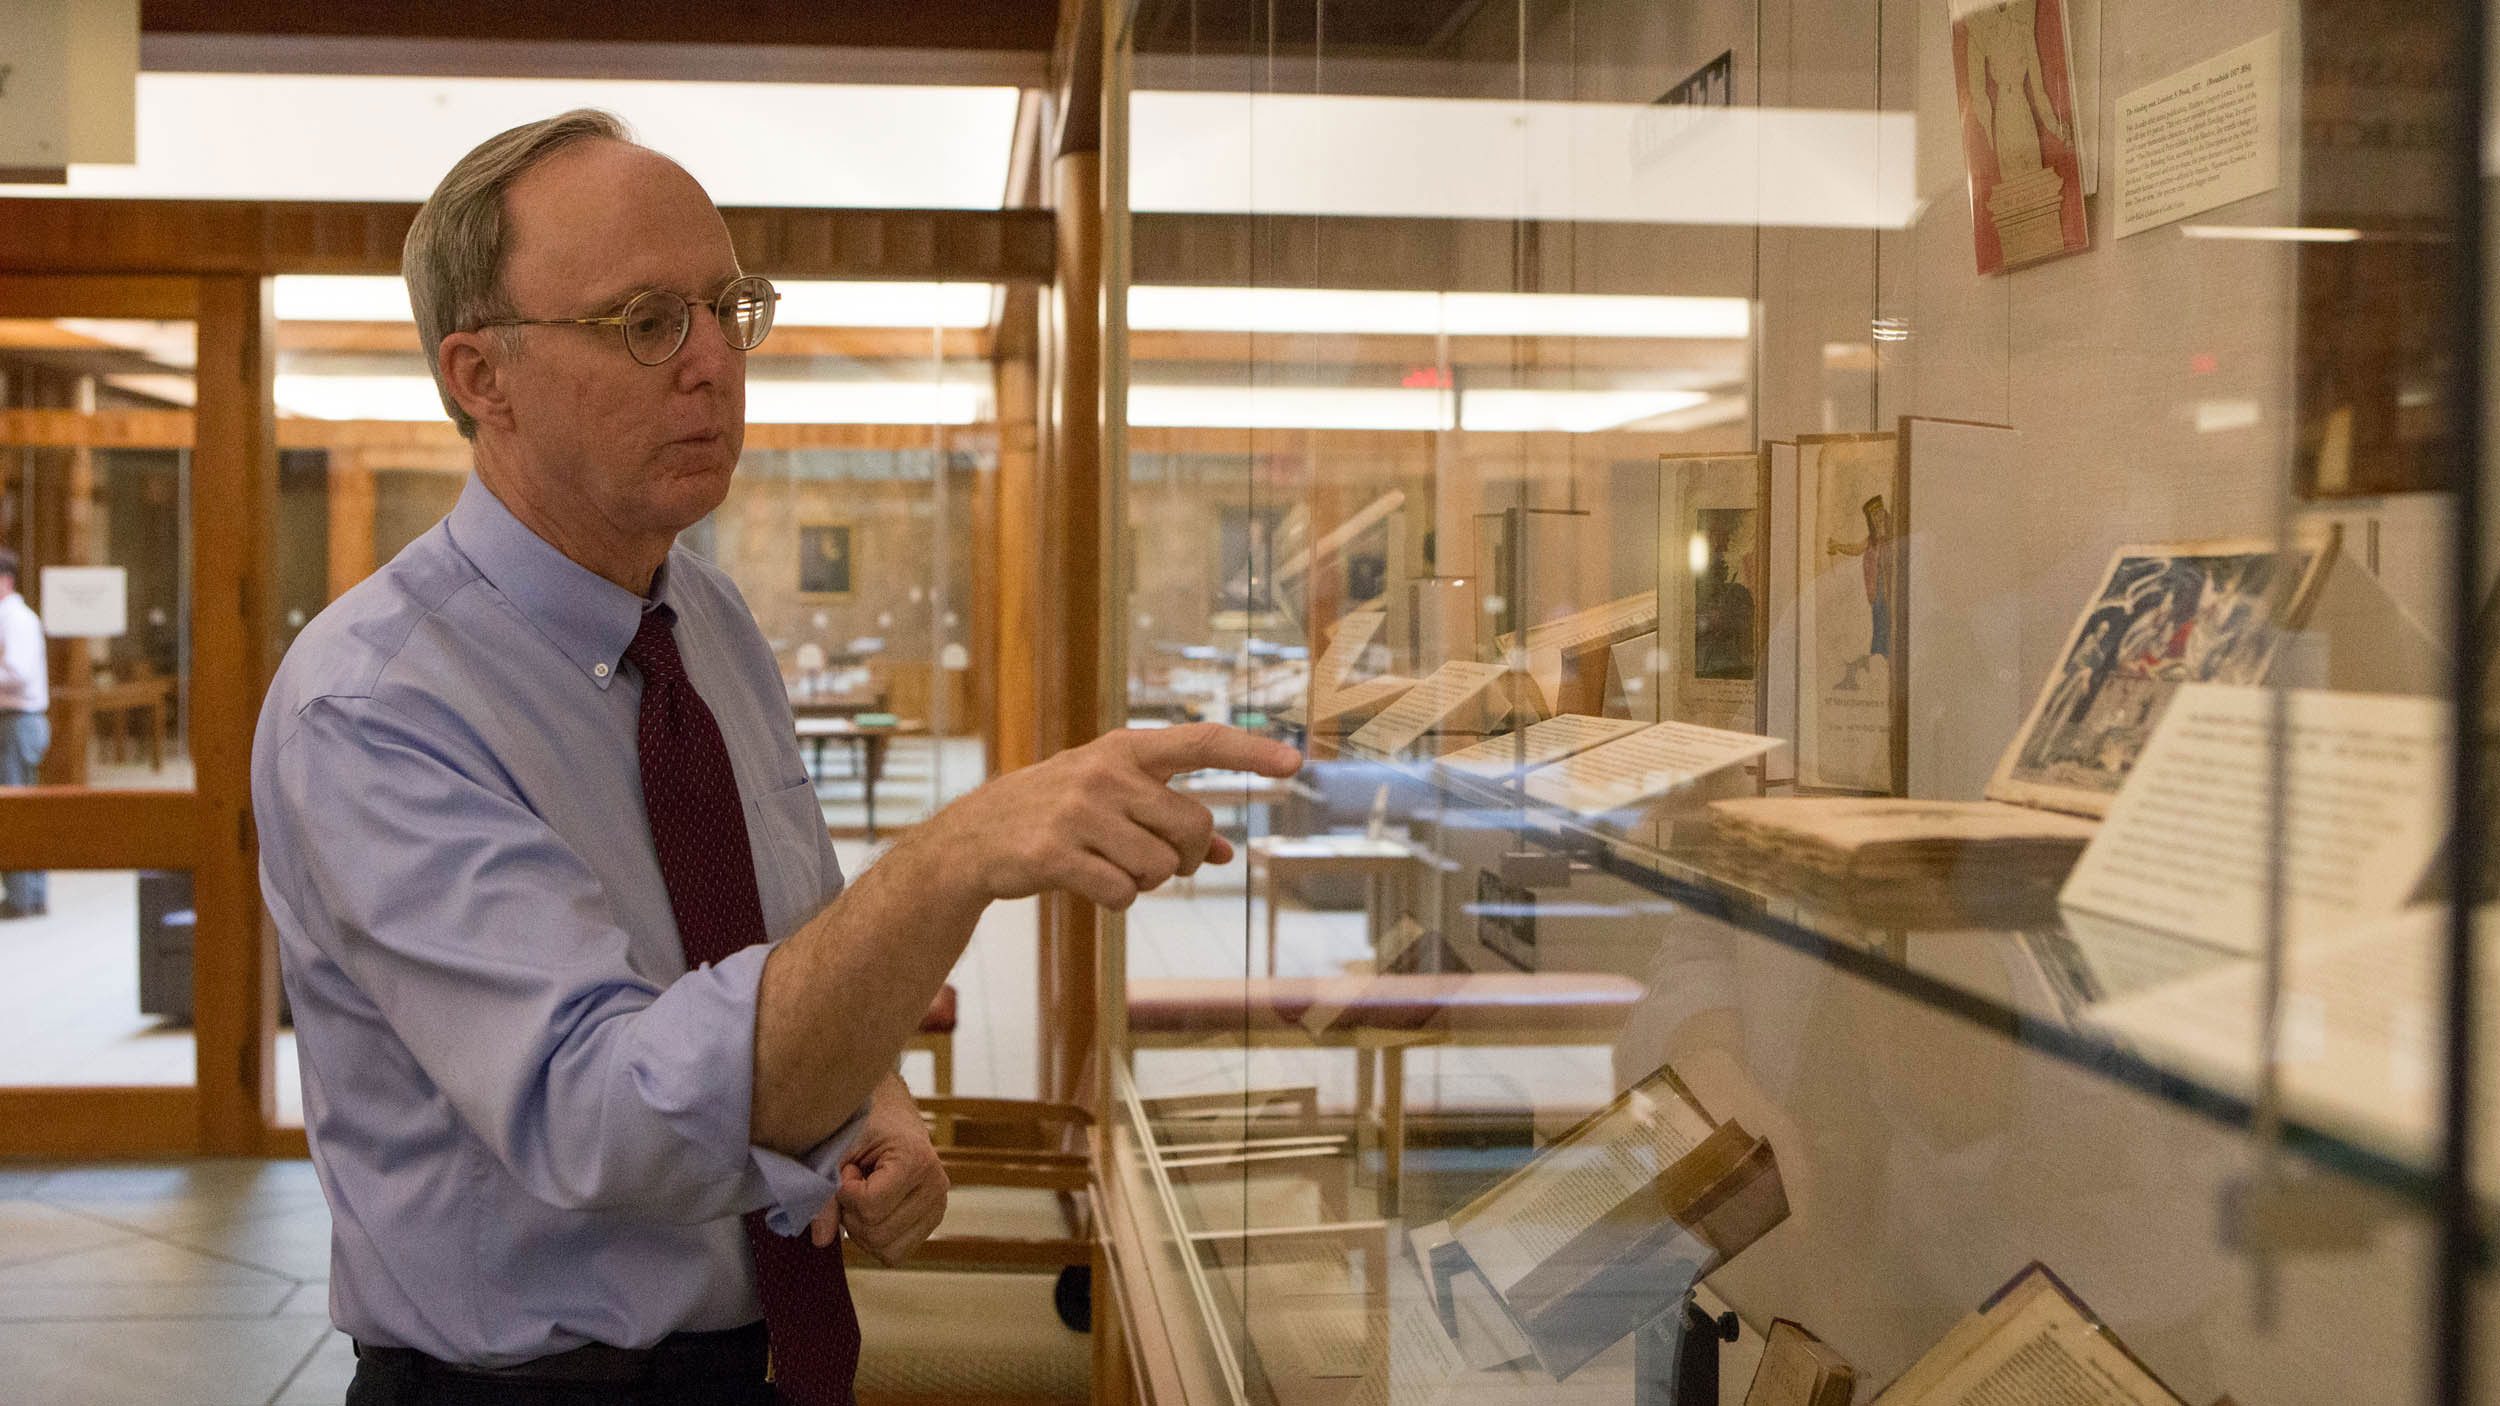 Man pointing to a glass case with old books in them talking